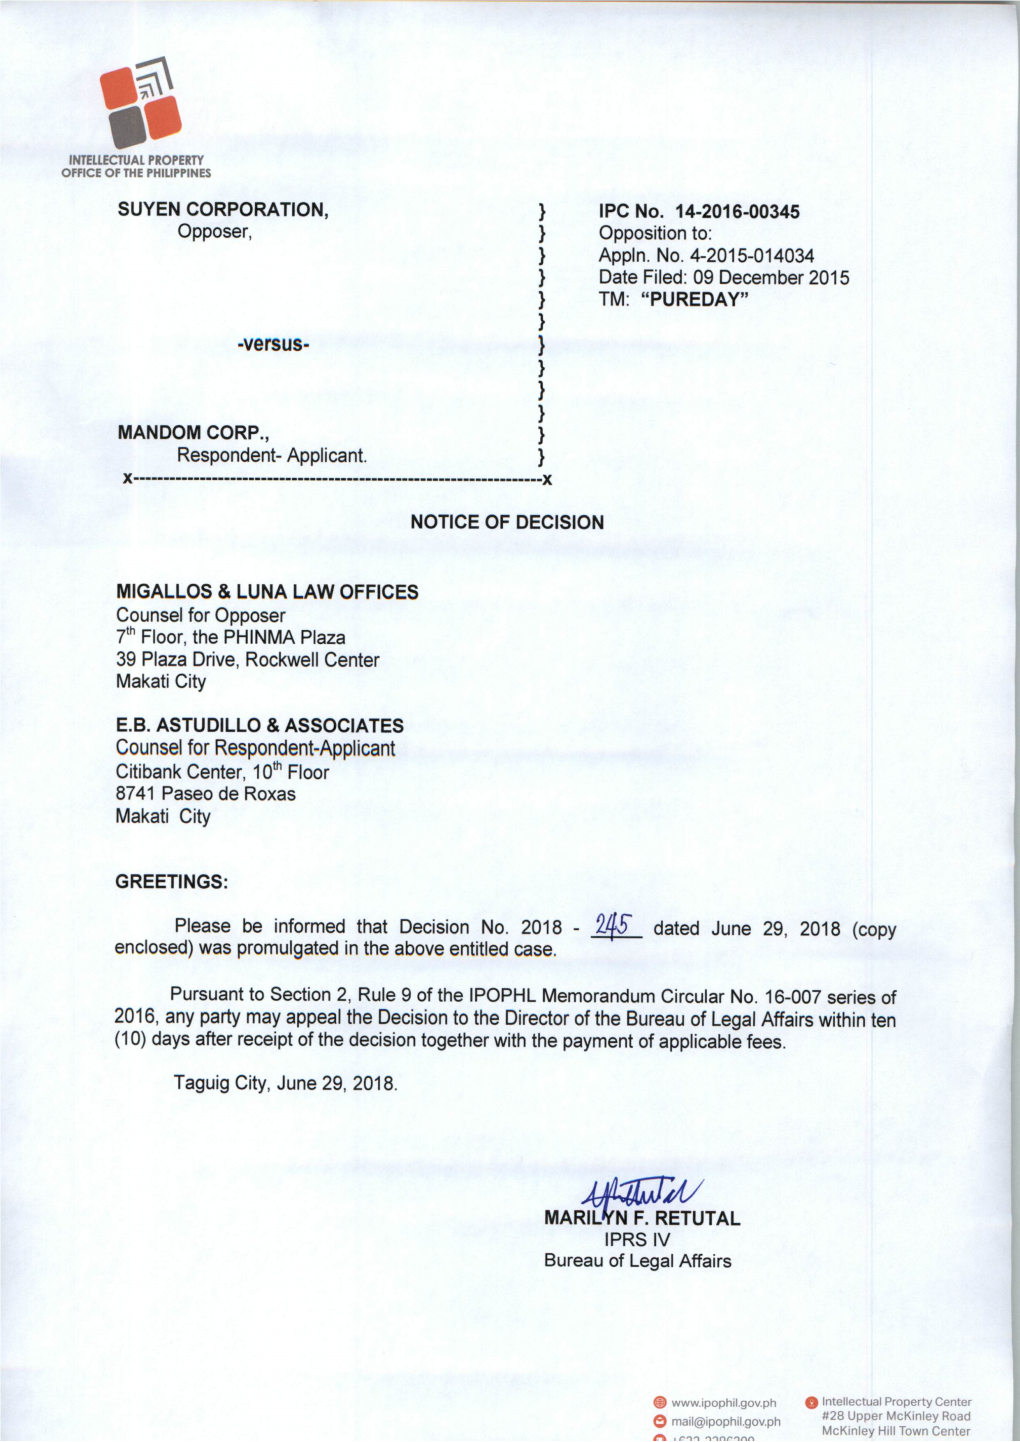 Copy Enclosed) Was Promulgated in the Above Entitled Case